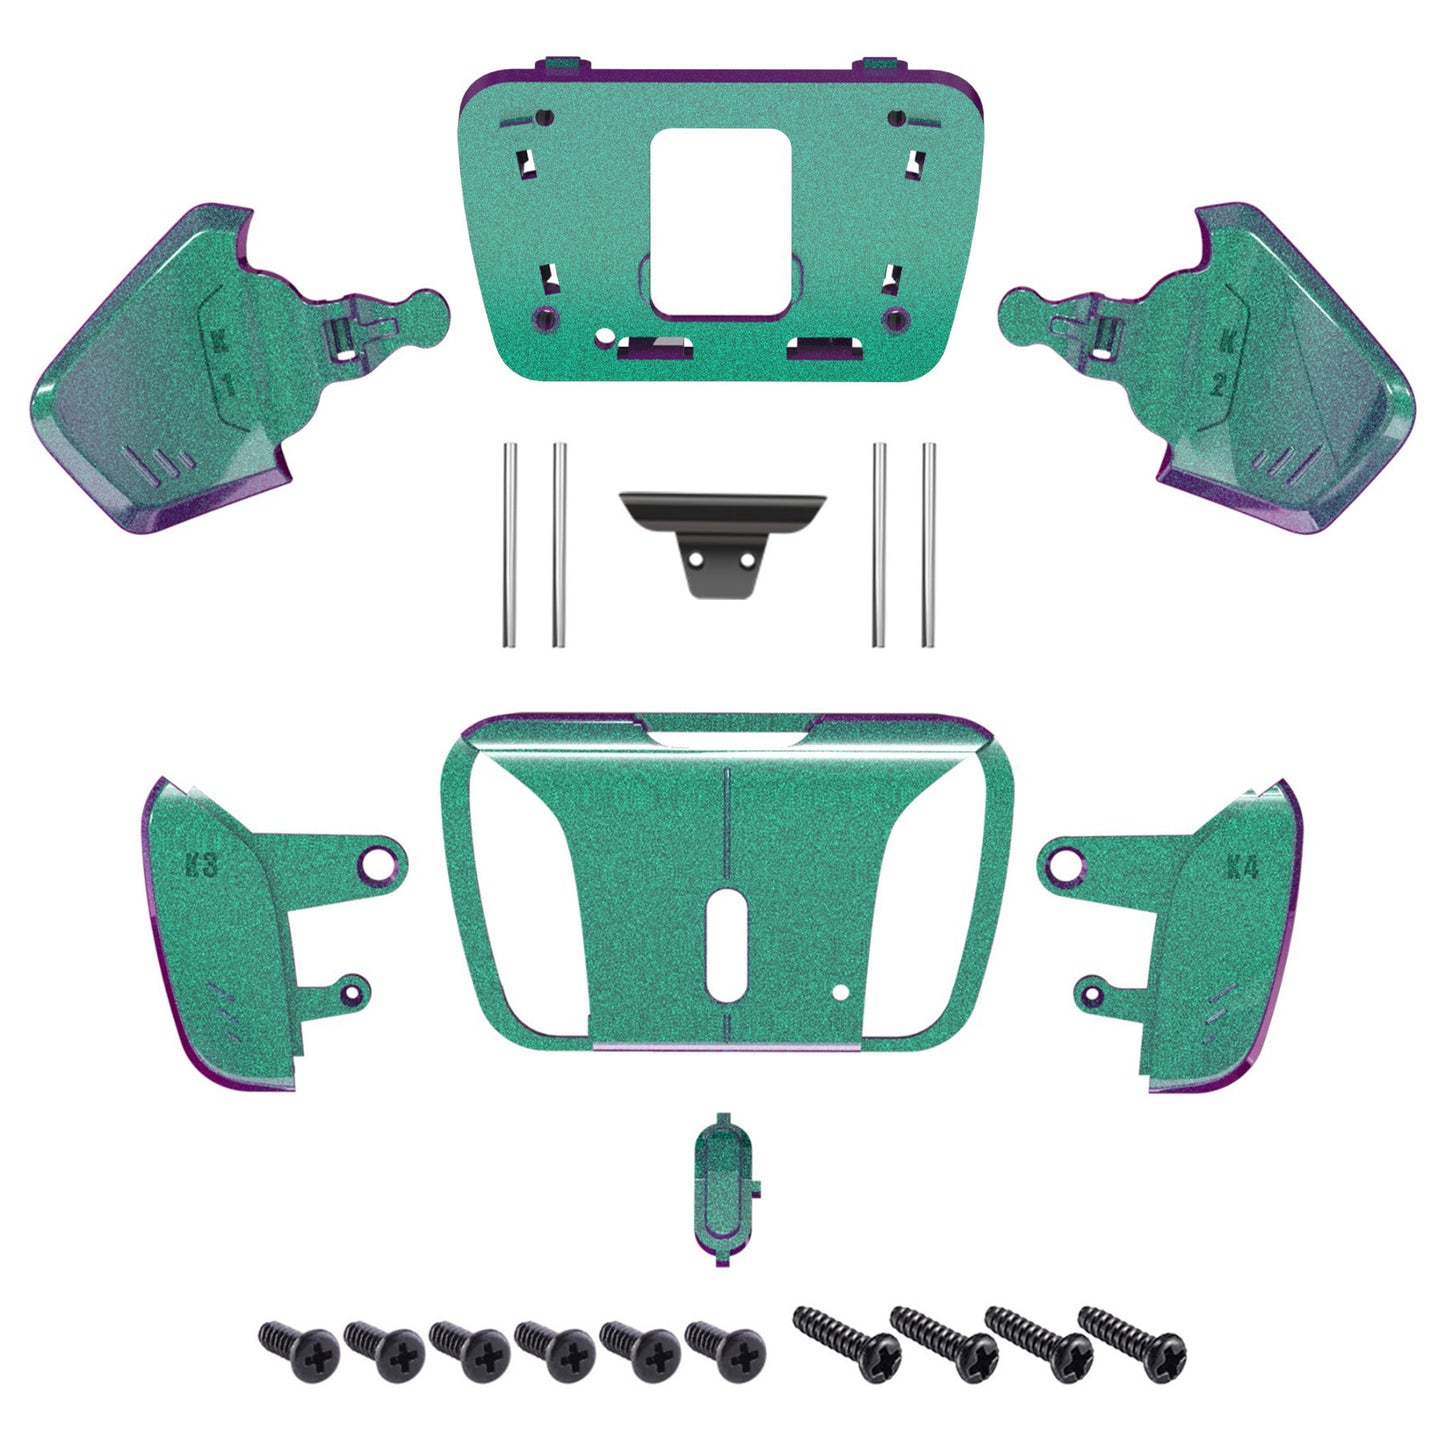 eXtremeRate Retail Chameleon Green Purple Replacement Redesigned K1 K2 K3 K4 Back Buttons Housing Shell for ps5 Controller eXtremeRate RISE4 Remap Kit - Controller & RISE4 Remap Board NOT Included - VPFP3004